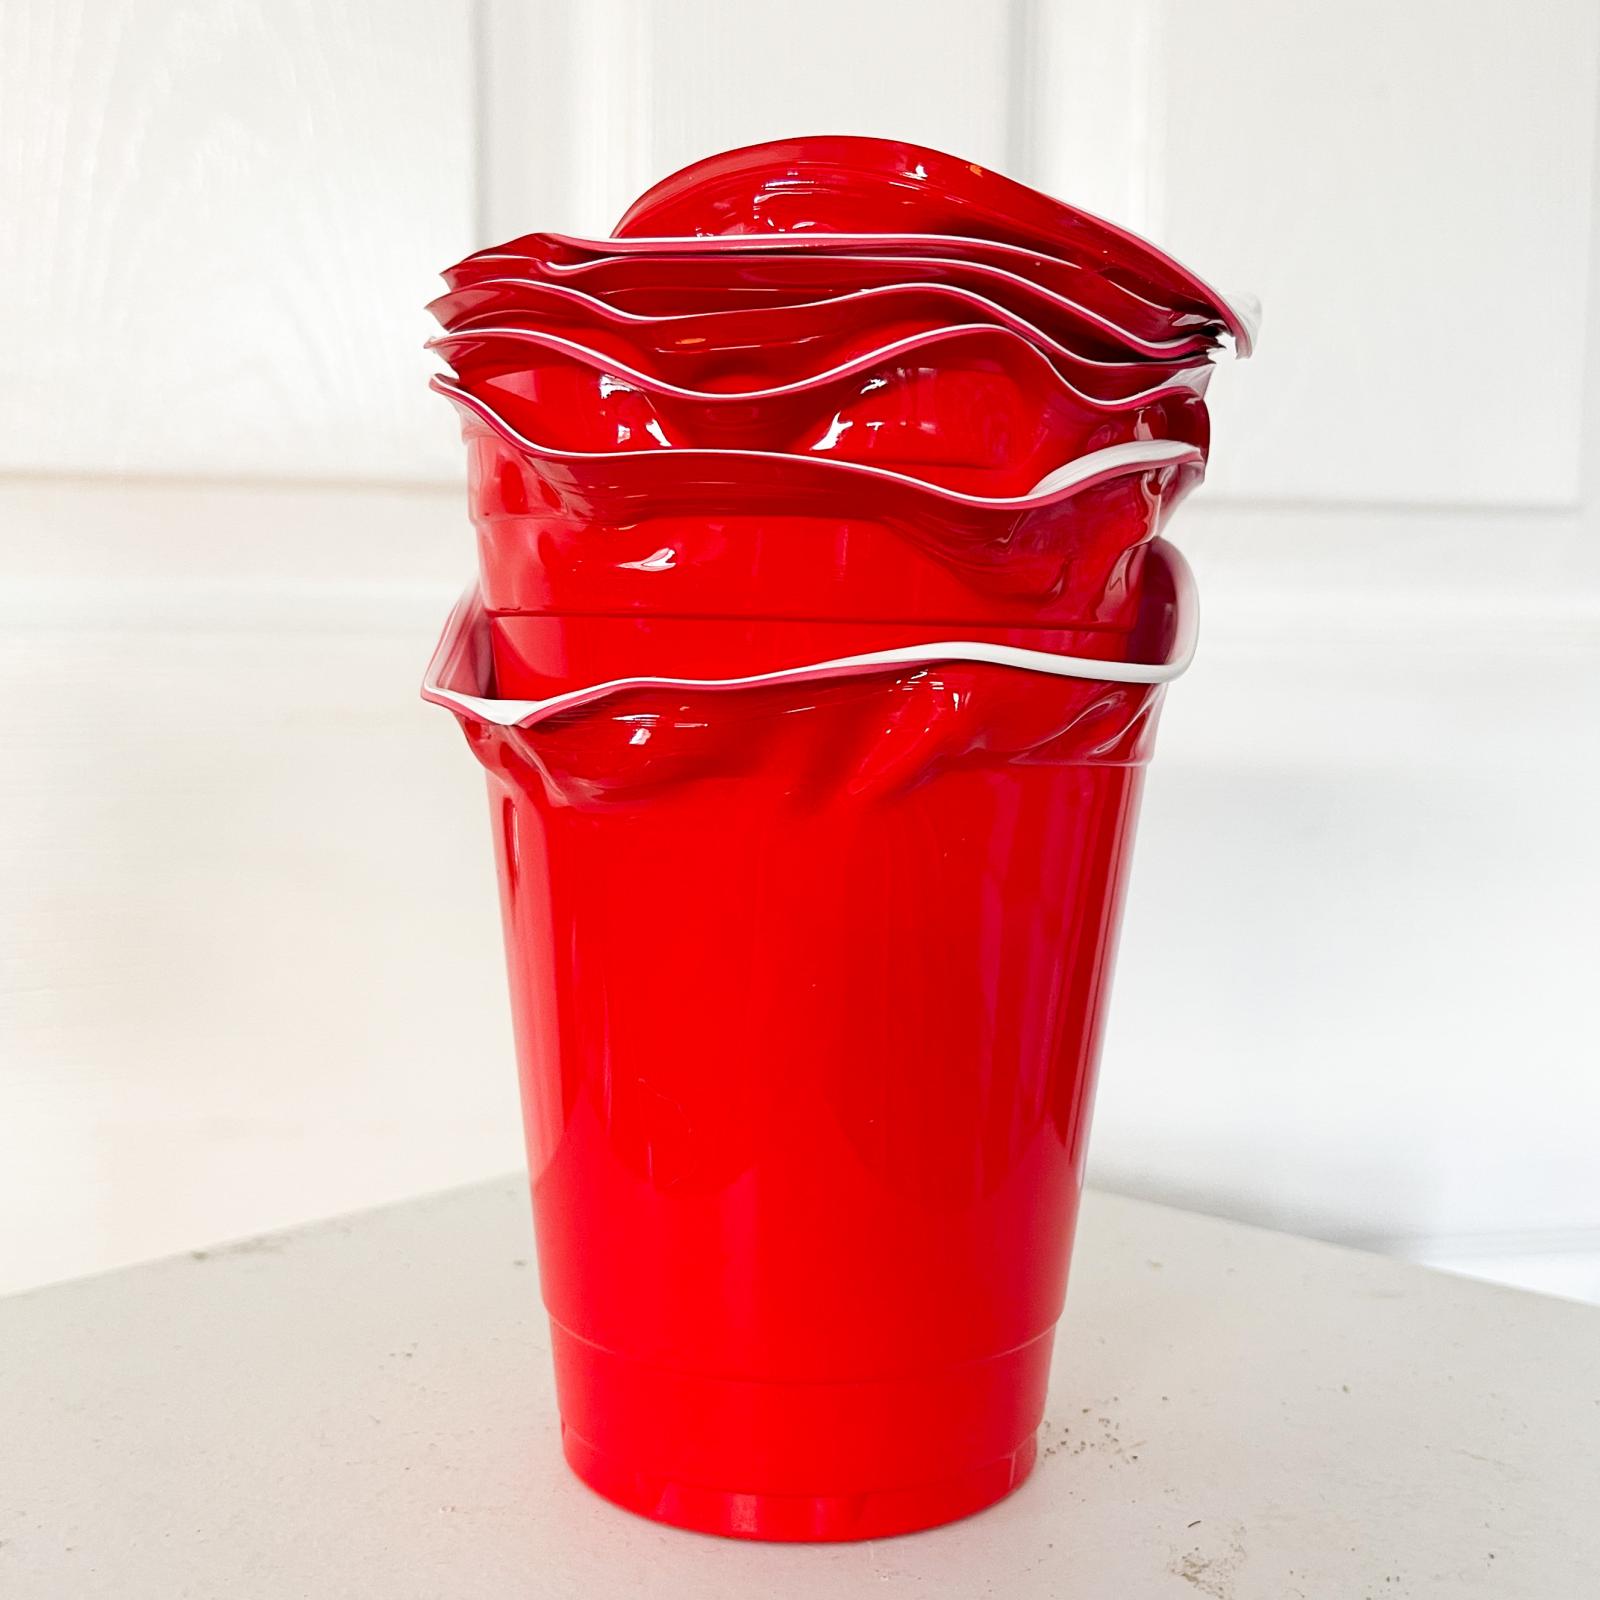 Generic Solo Cup Manipulations, 2021